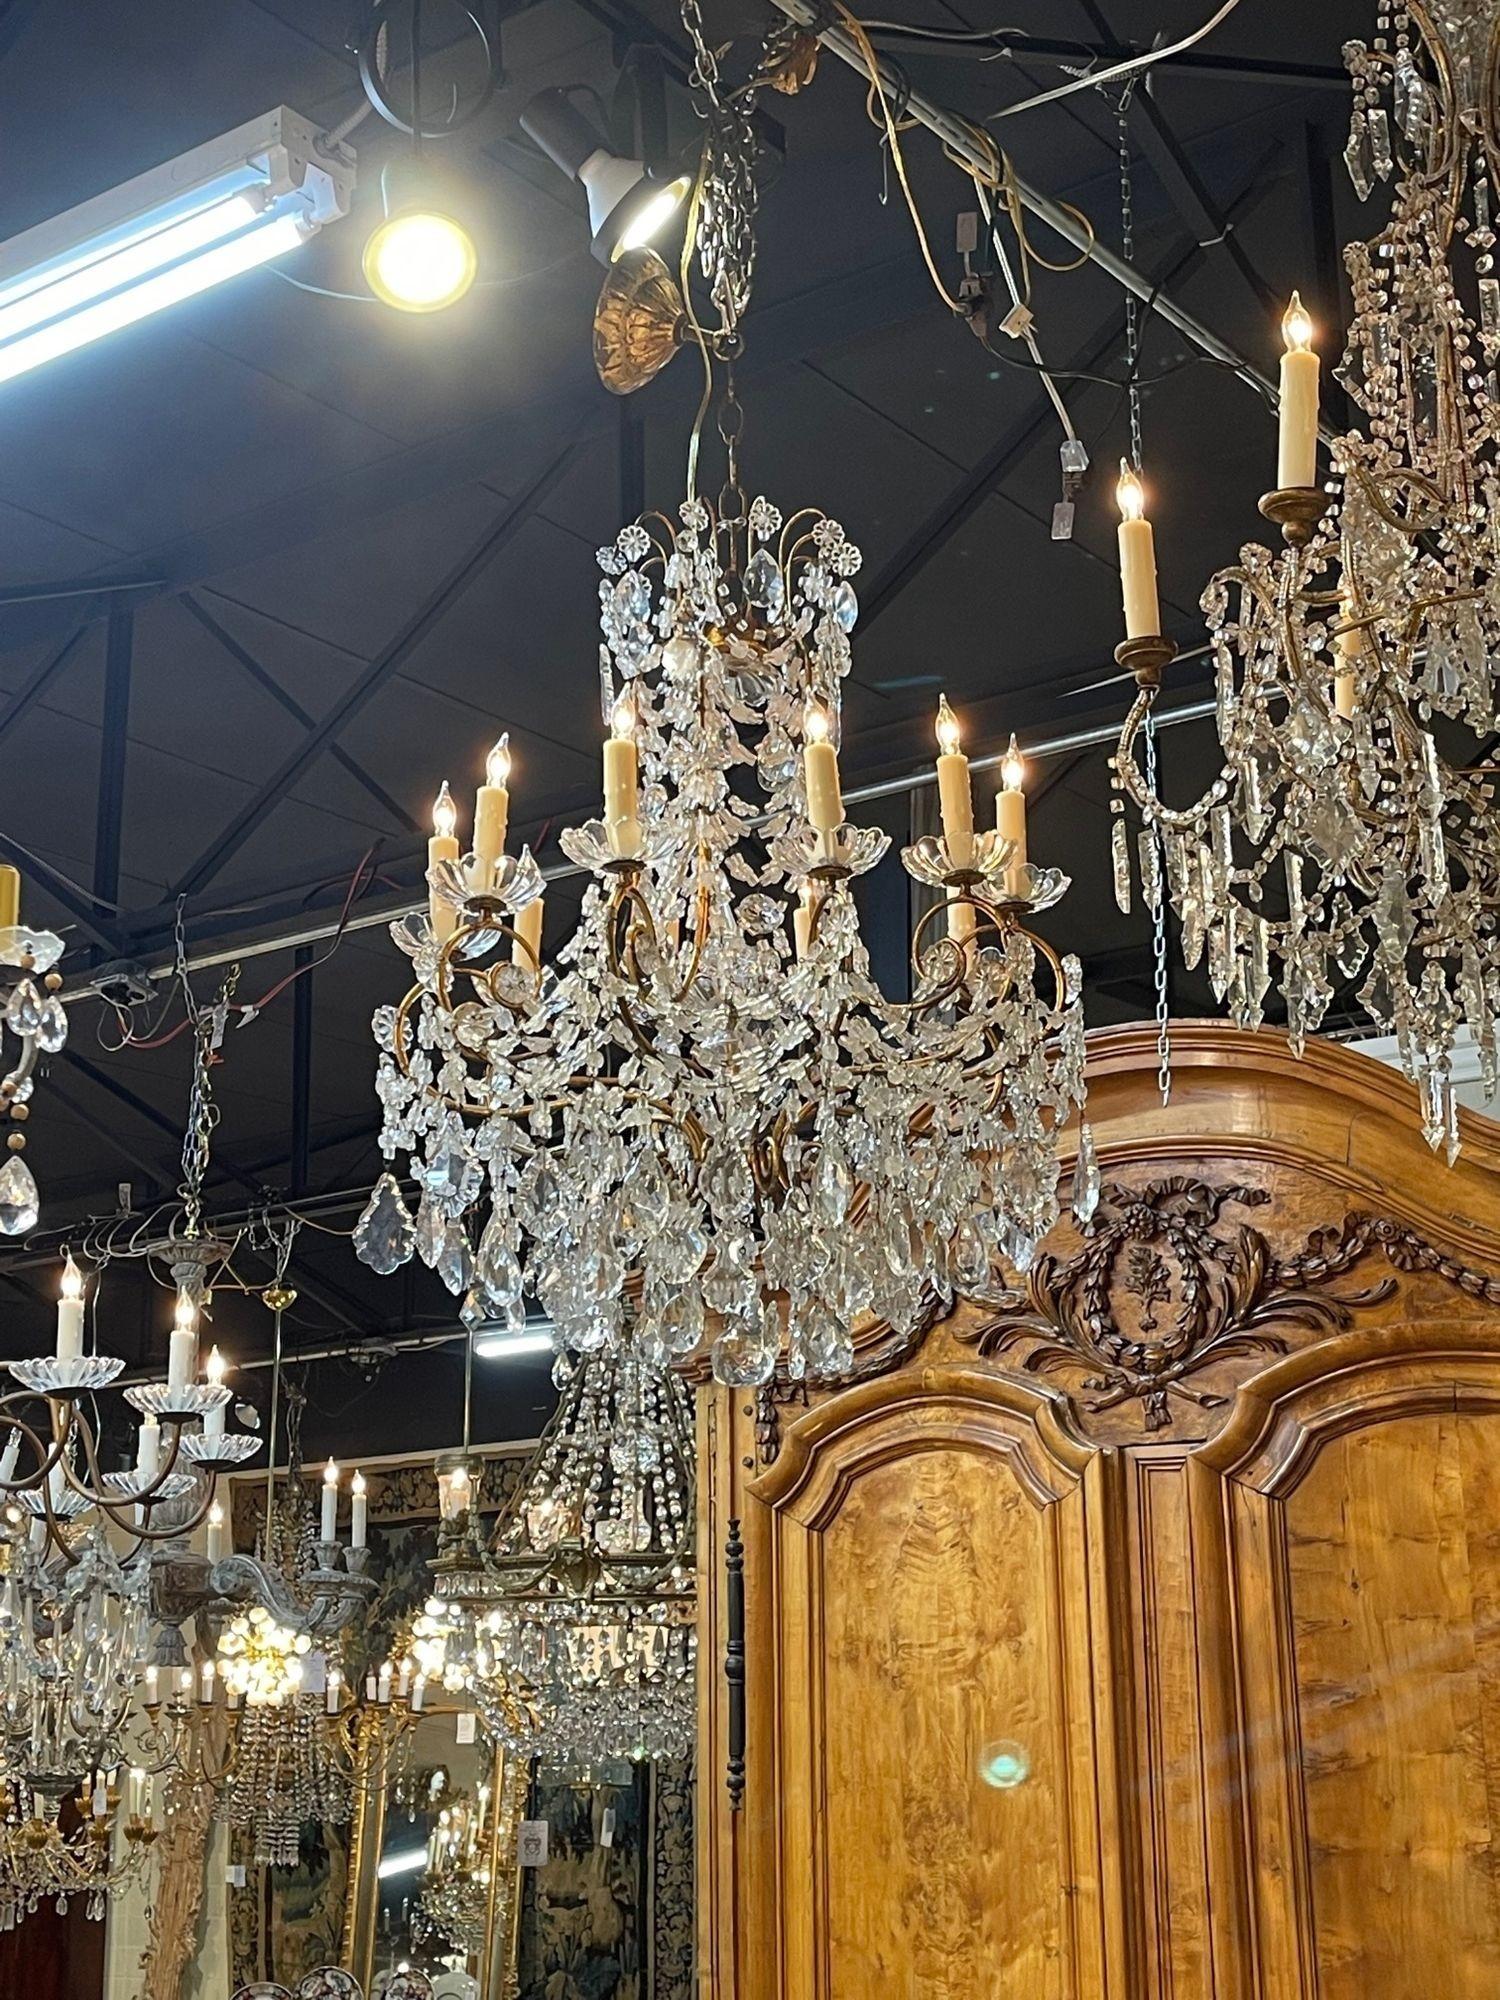 Very fine vintage Italian beaded crystal chandelier with 10 lights. An elegant piece with a plethora of glistening crystals. So pretty!!